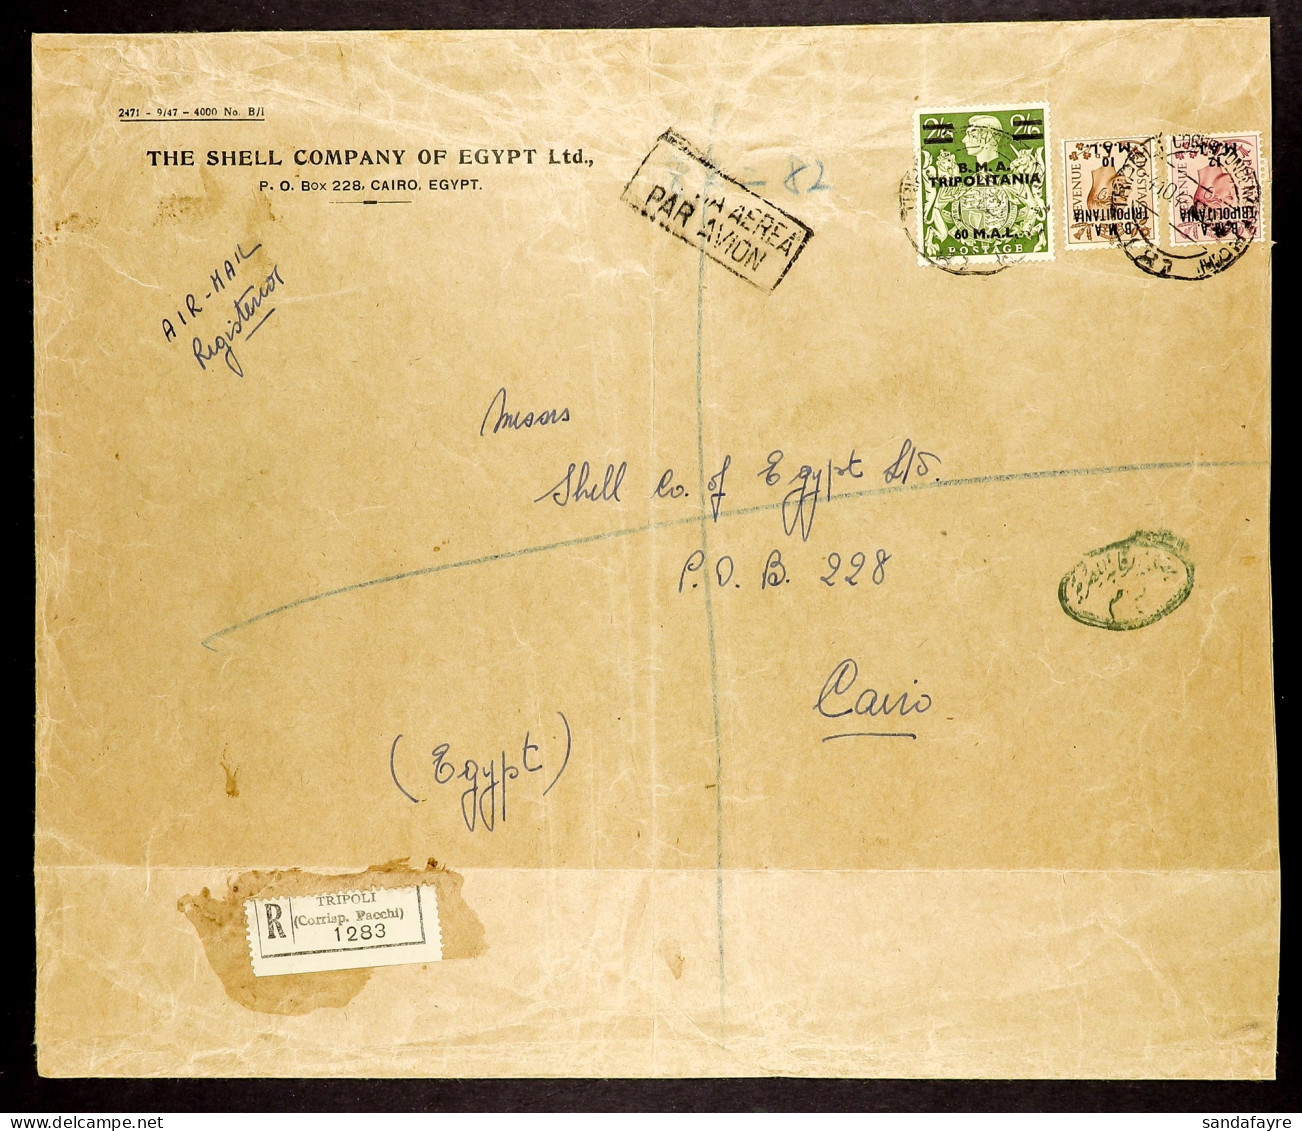 TRIPOLITANIA 1948 (4 Oct) Large Env Registered To Cairo Bearing The 10m On 5d, 12m On 6p And 60m On 2s6d Stamps Tied Tri - Afrique Orientale Italienne